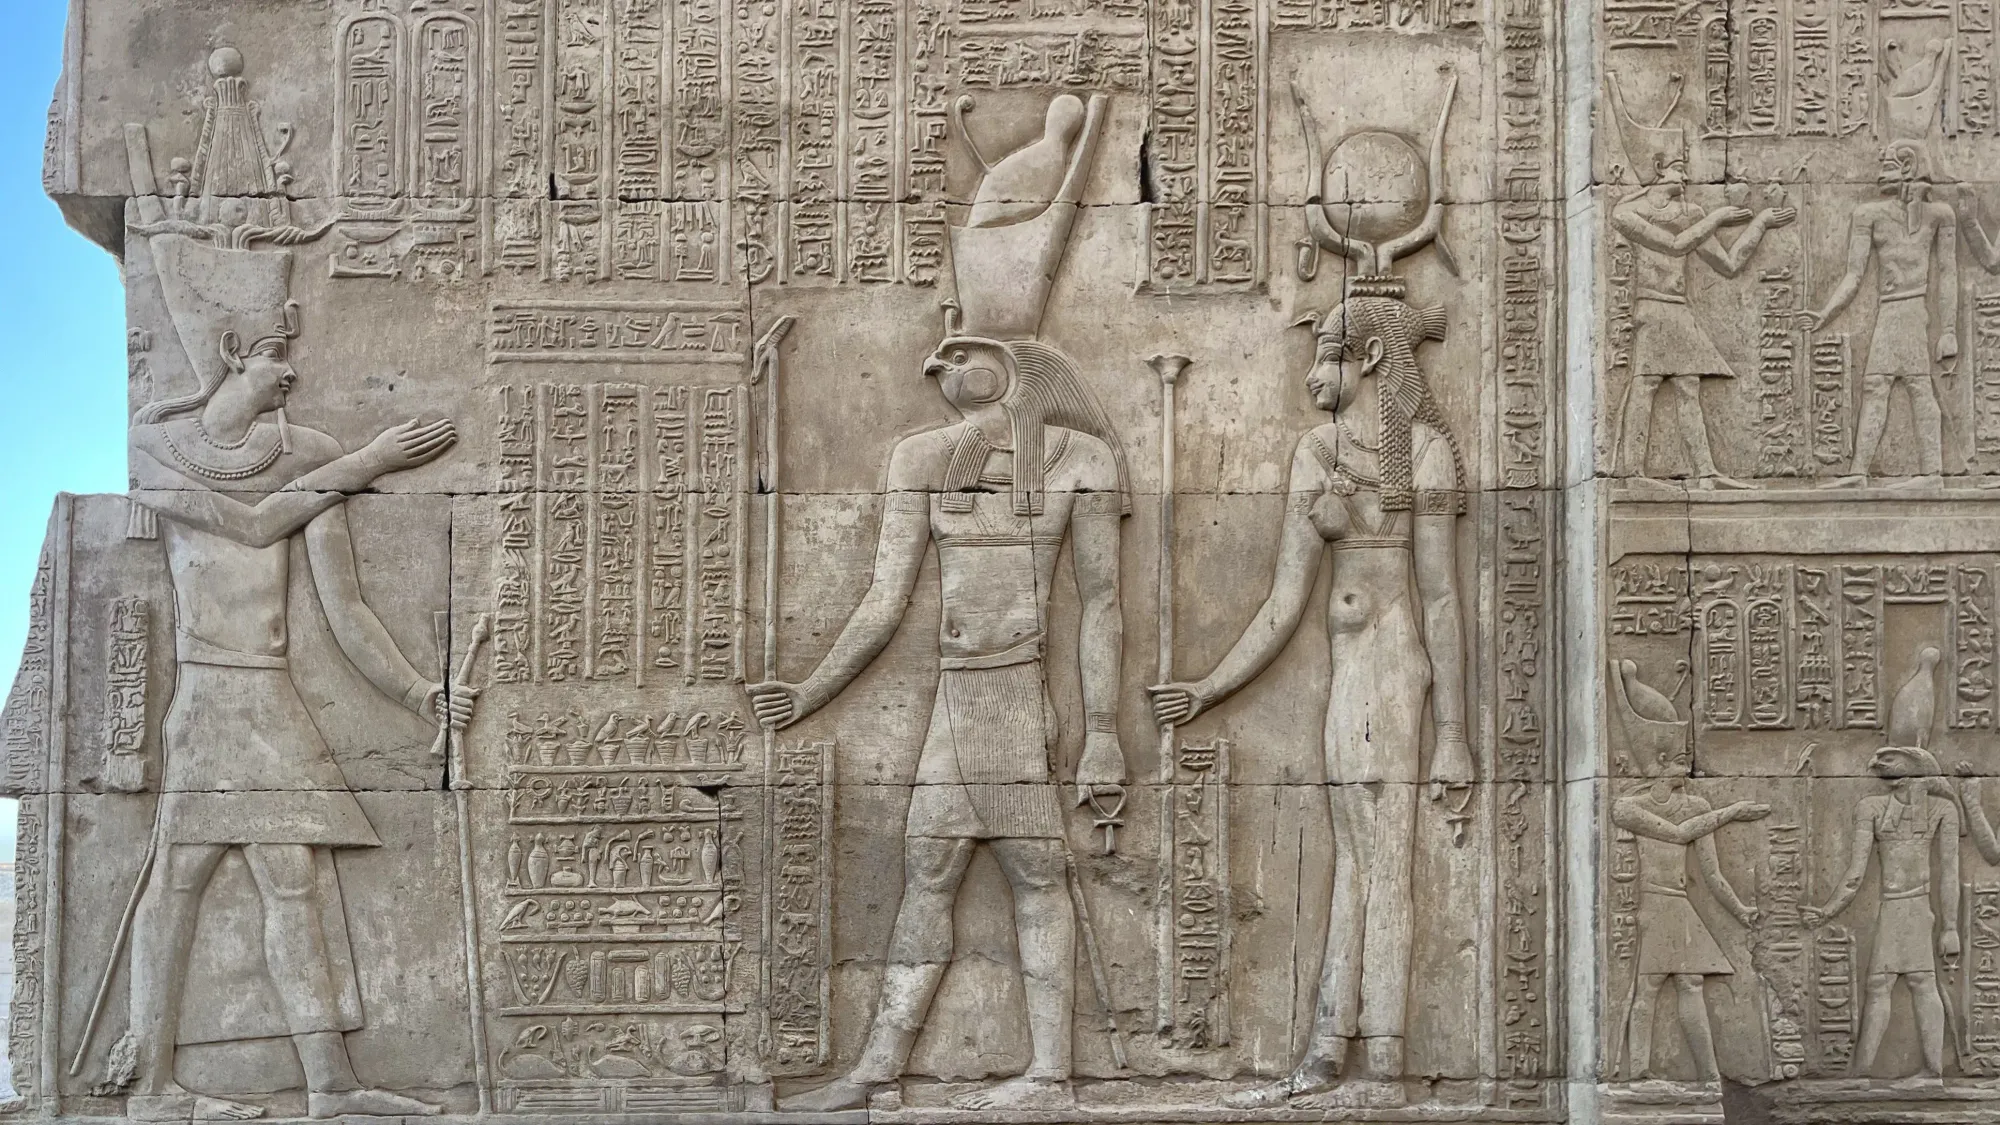 Reliefs and hieroglyphics in the Kom Ombo temple